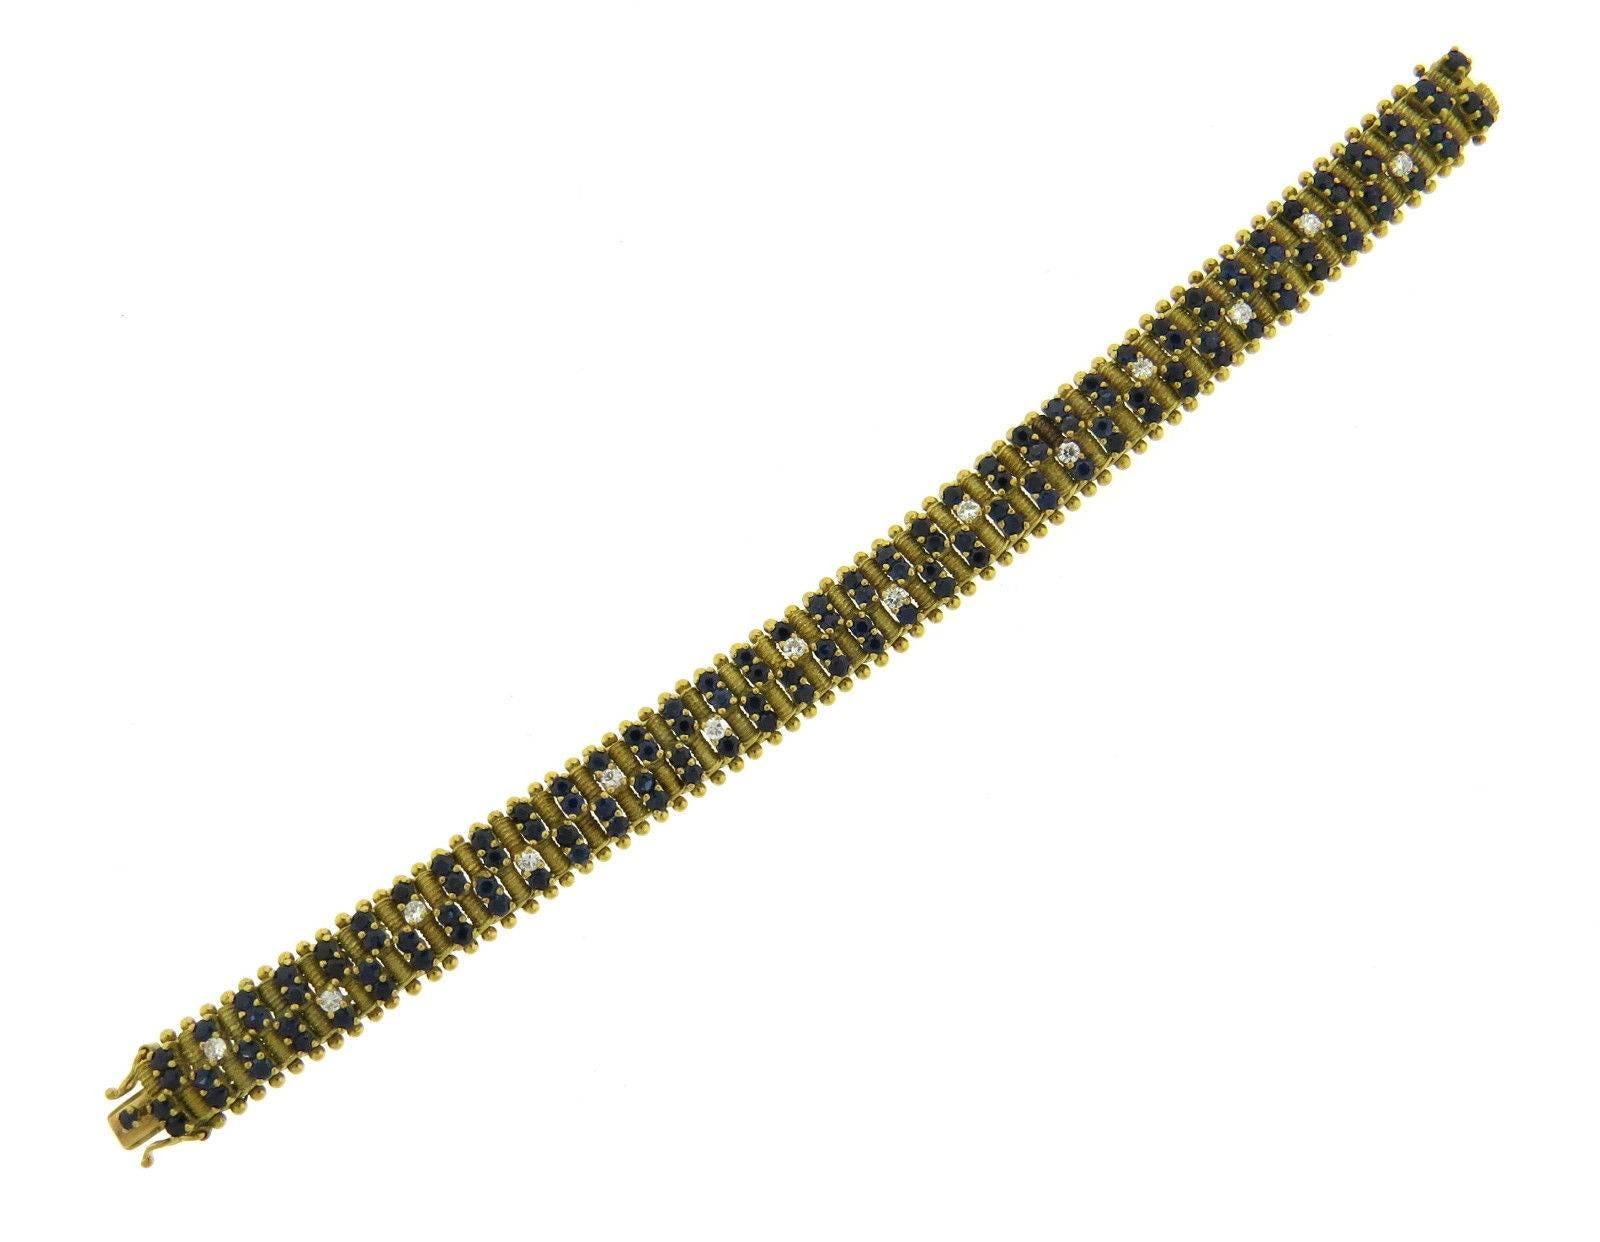 An 18k yellow gold bracelet set sapphires and approximately 0.70ctw of GH/VS diamonds. The bracelet is 7 1/4